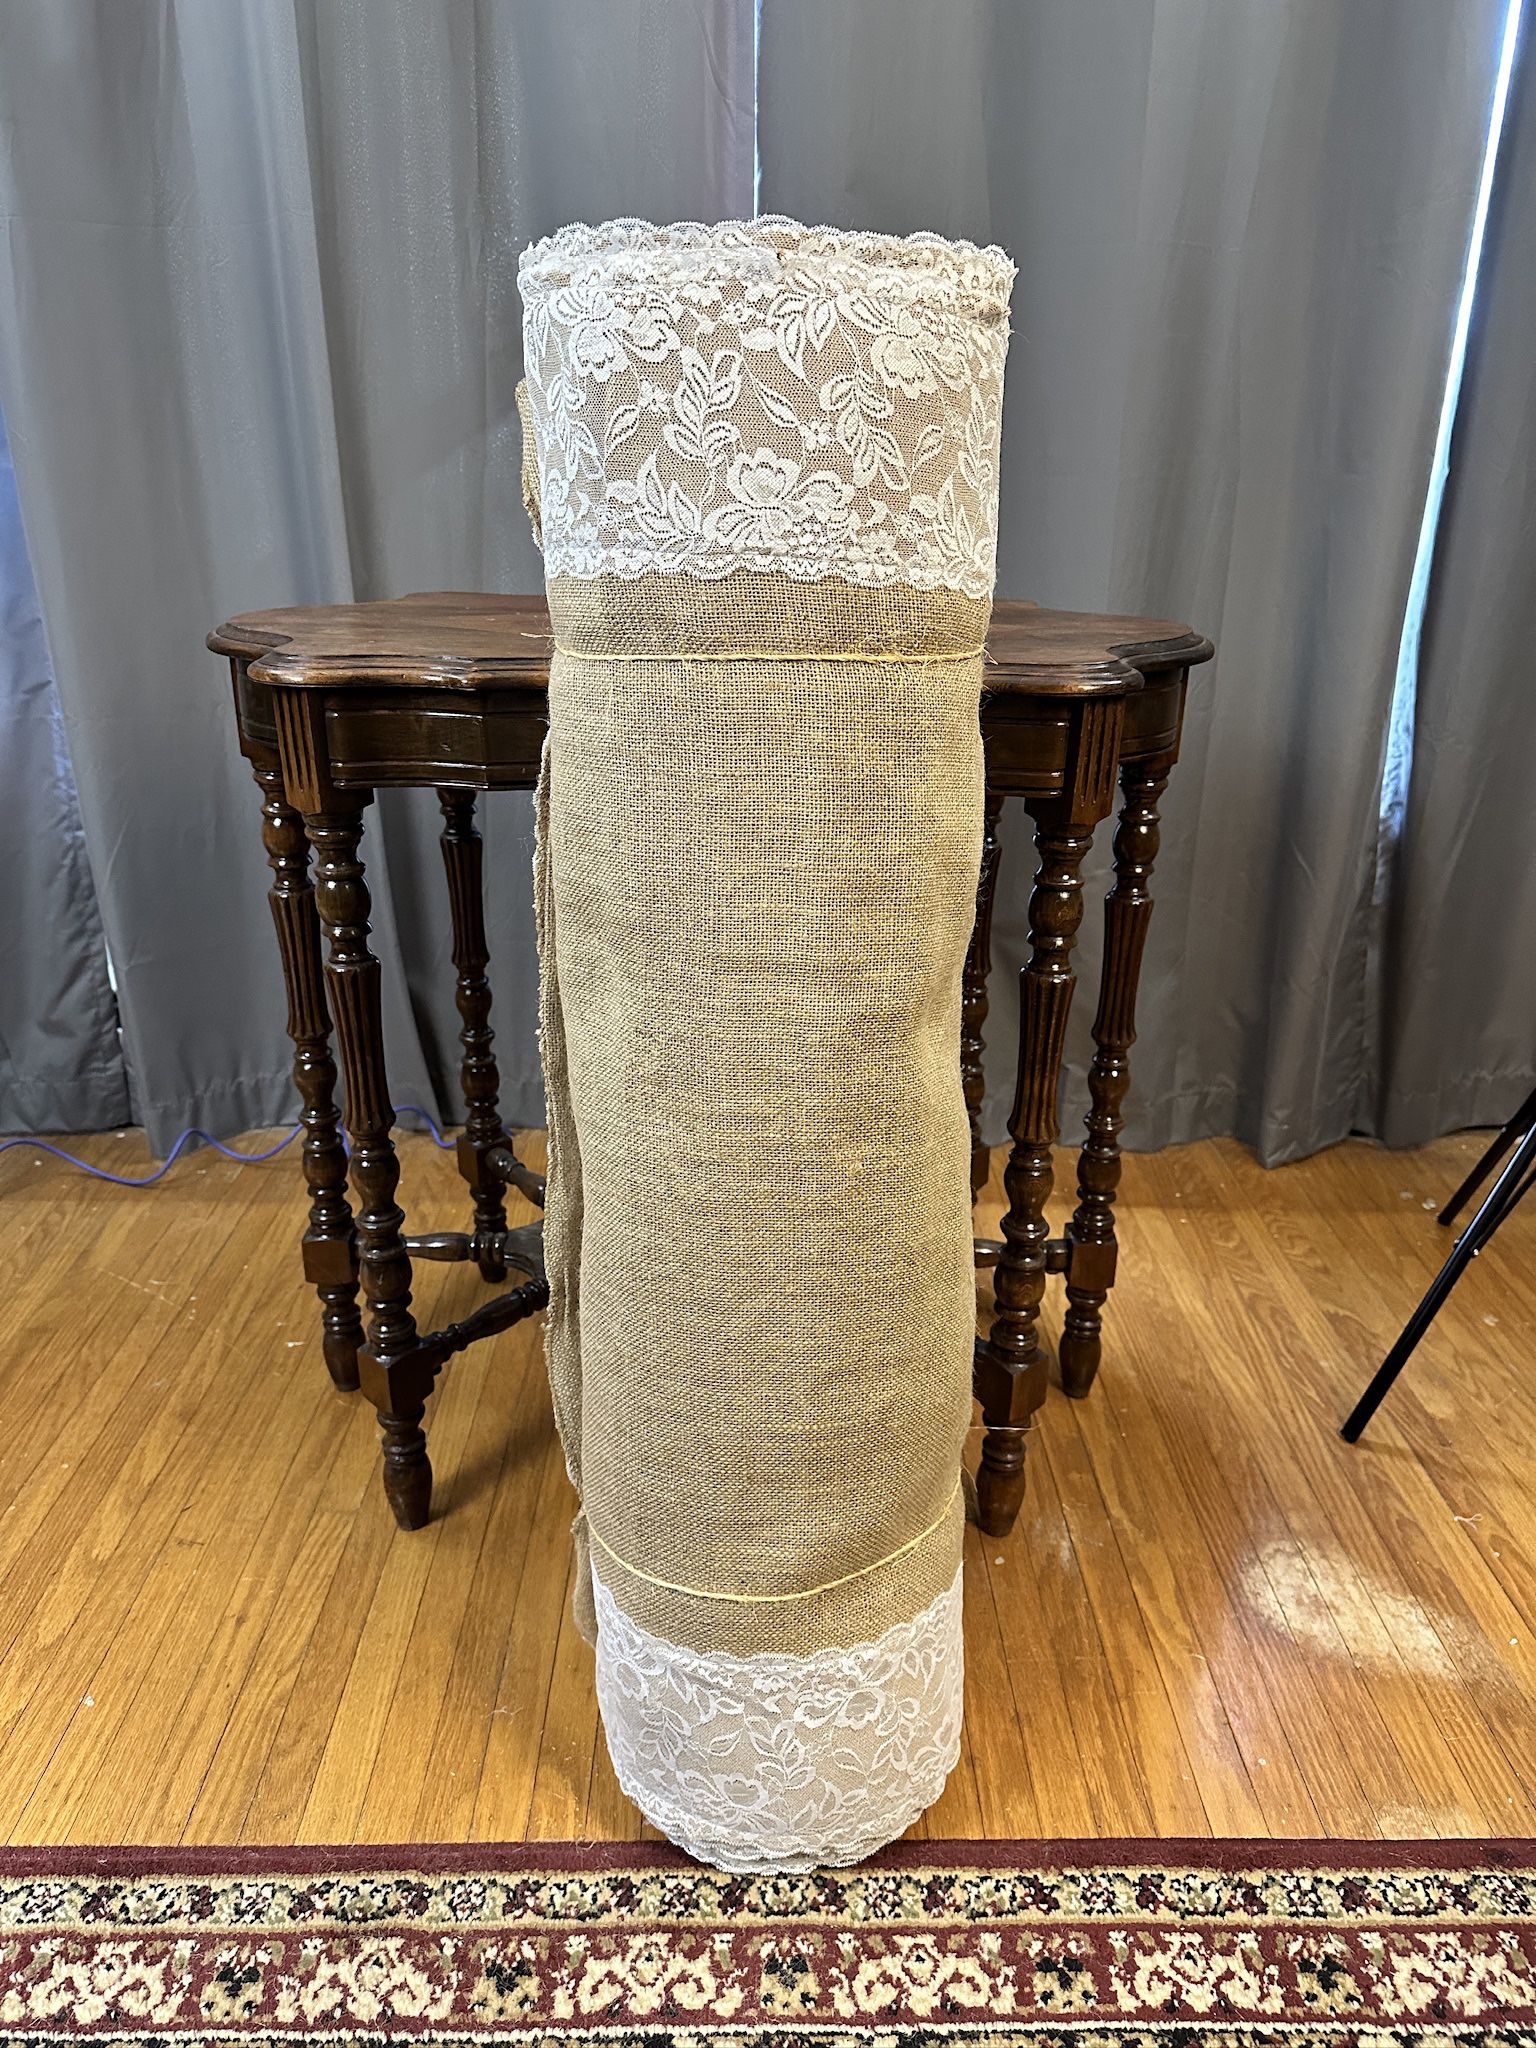 36in. X 100ft. Natural Burlap Wedding Aisle Runner With Lace Jute